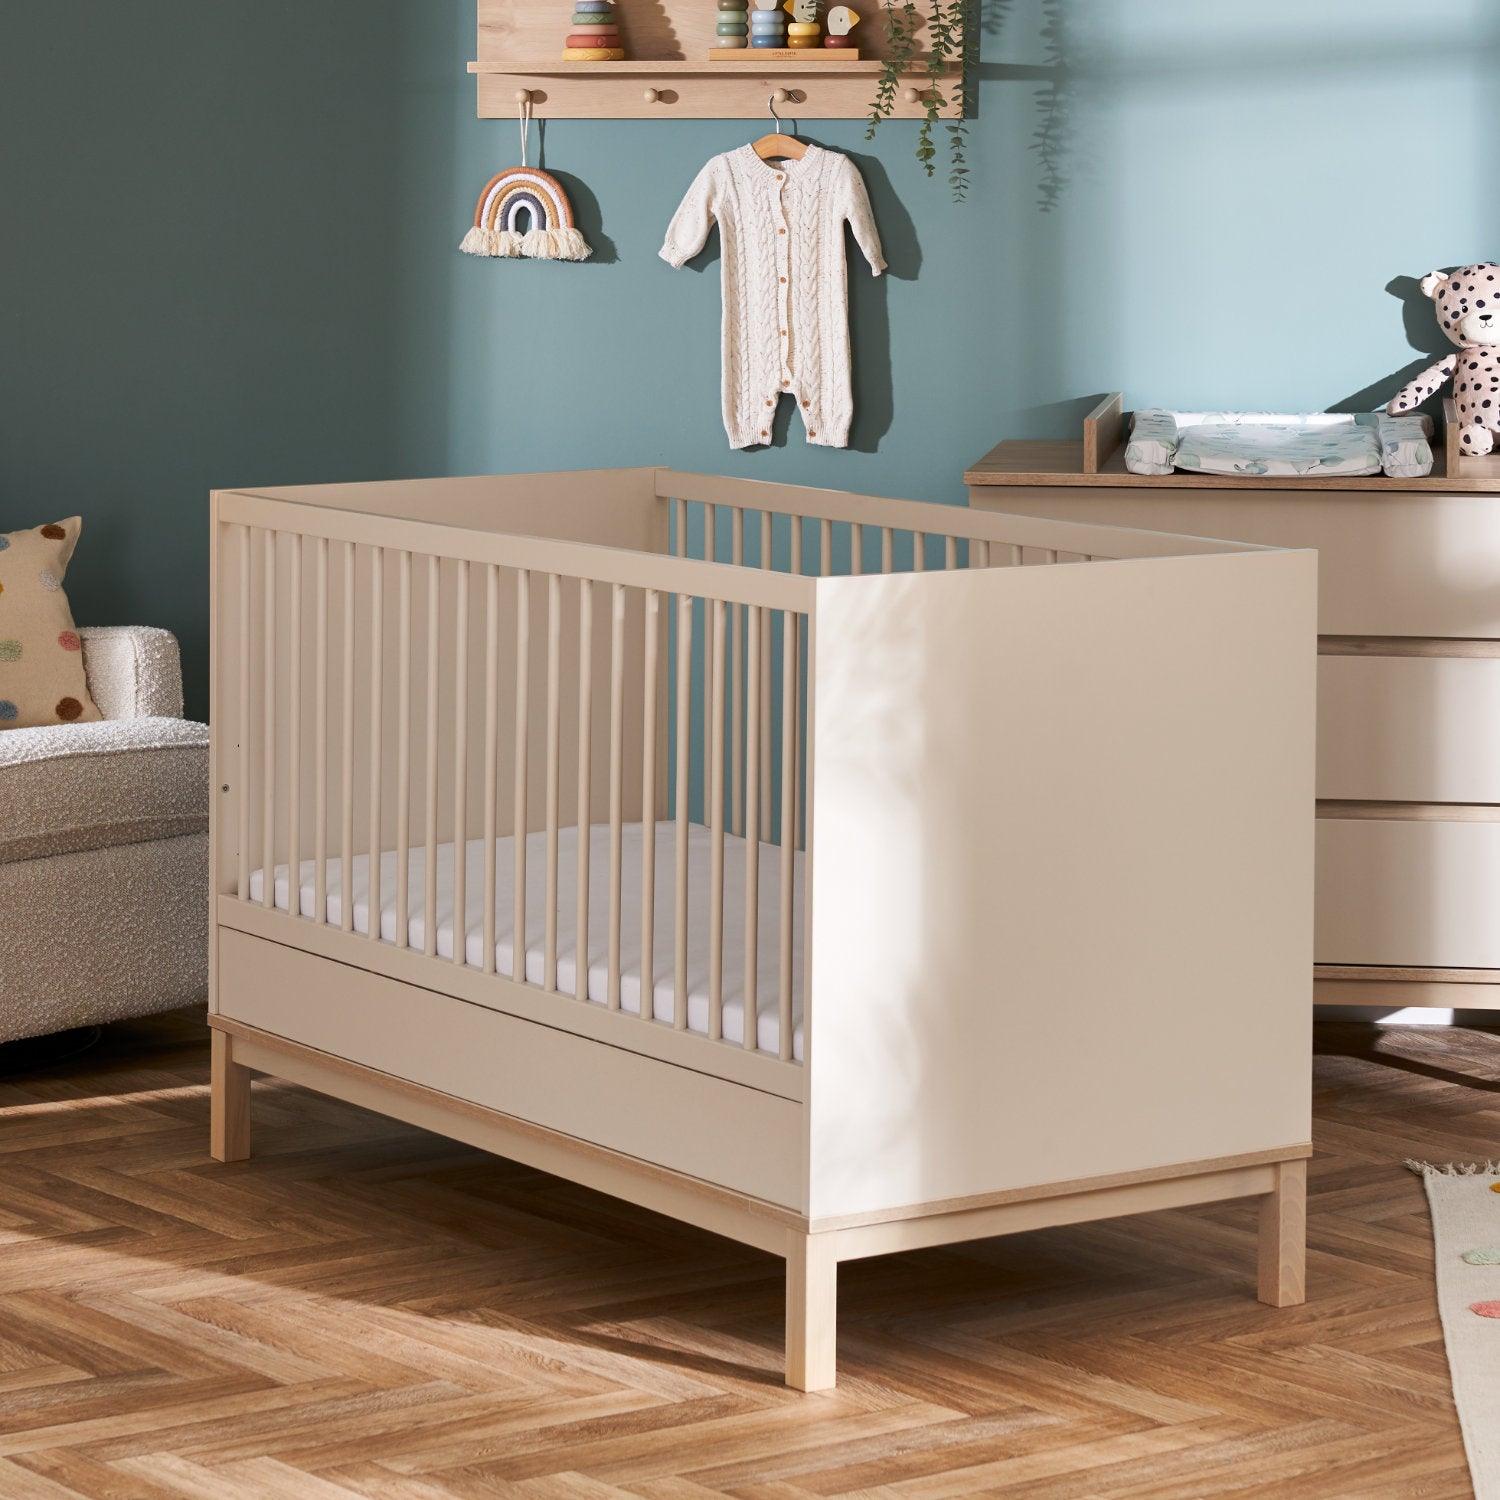 View Astrid Cot Bed Satin information